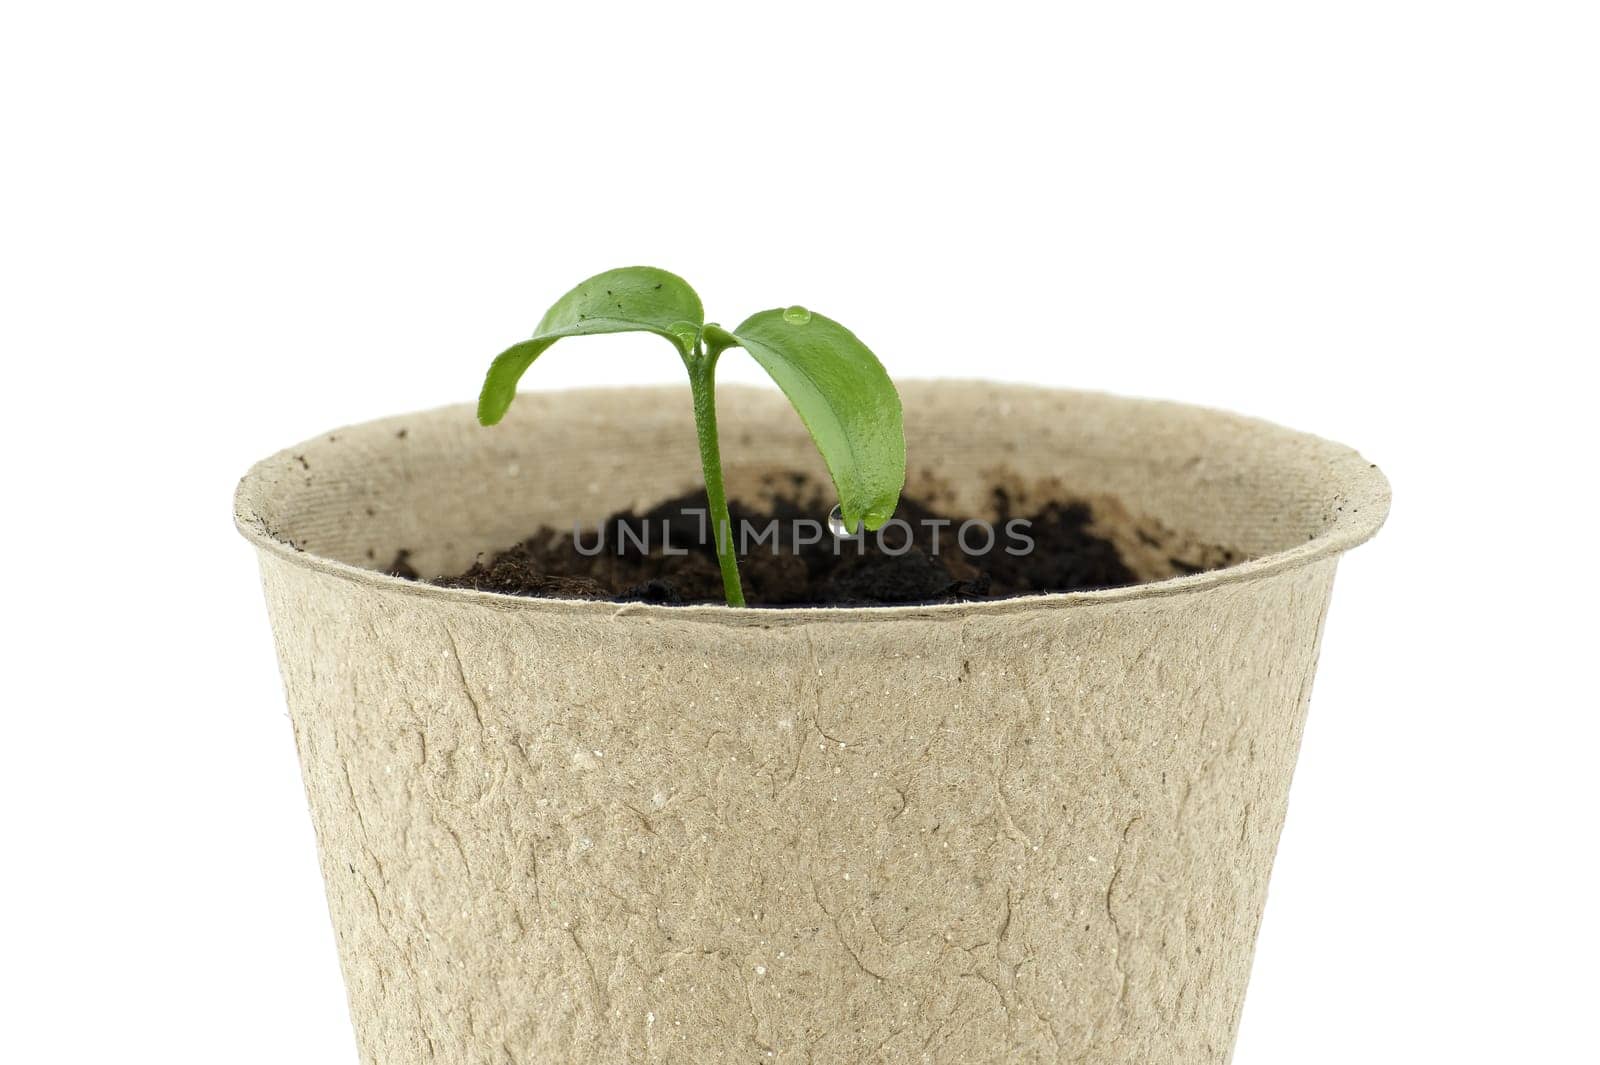 Isolated against a white background, a small green seedling emerges from dark brown dirt inside a circular, light brown biodegradable pot